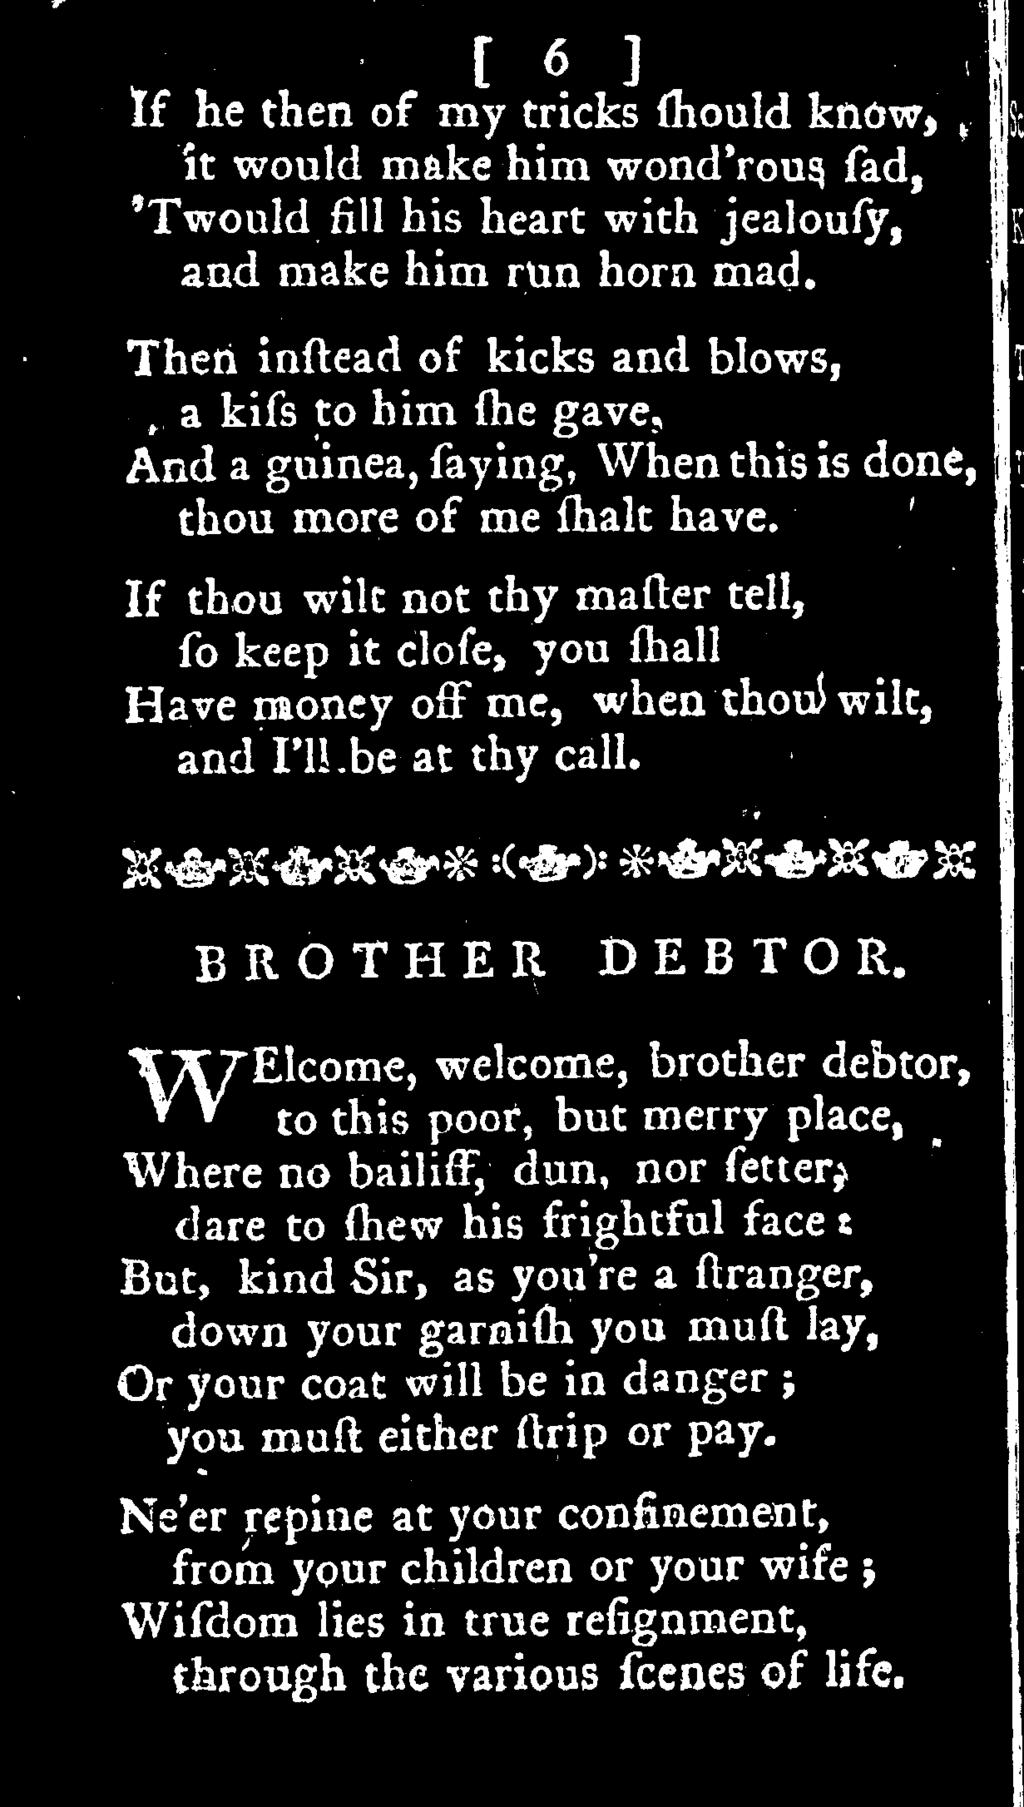 WElcome, welcome, brother debtor, to this poor, but merry place, Where no bailiff, dun, nor fetter^ dare to (hew his frightful face